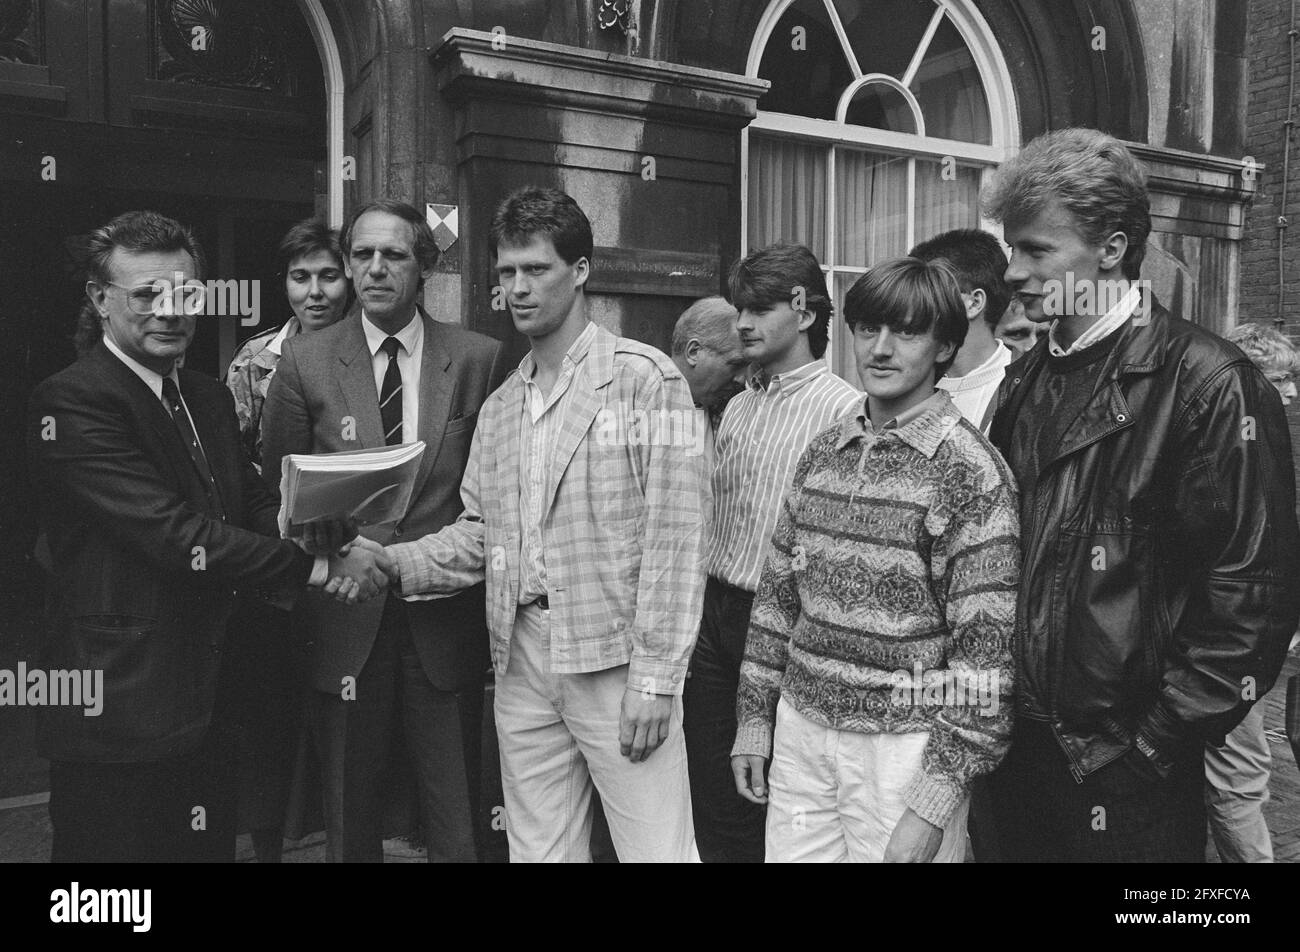 Lower House, Haarlem players offer petition to prevent deportation two Polish footballers; from left to right Kosto, Dijkstal, goalkeeper Edward Metgod, and two Poles, Robert Murawski and Piotr Modrzejewski., June 18, 1987, Deportations, goalkeepers, petitions, sports, footballers, The Netherlands, 20th century press agency photo, news to remember, documentary, historic photography 1945-1990, visual stories, human history of the Twentieth Century, capturing moments in time Stock Photo